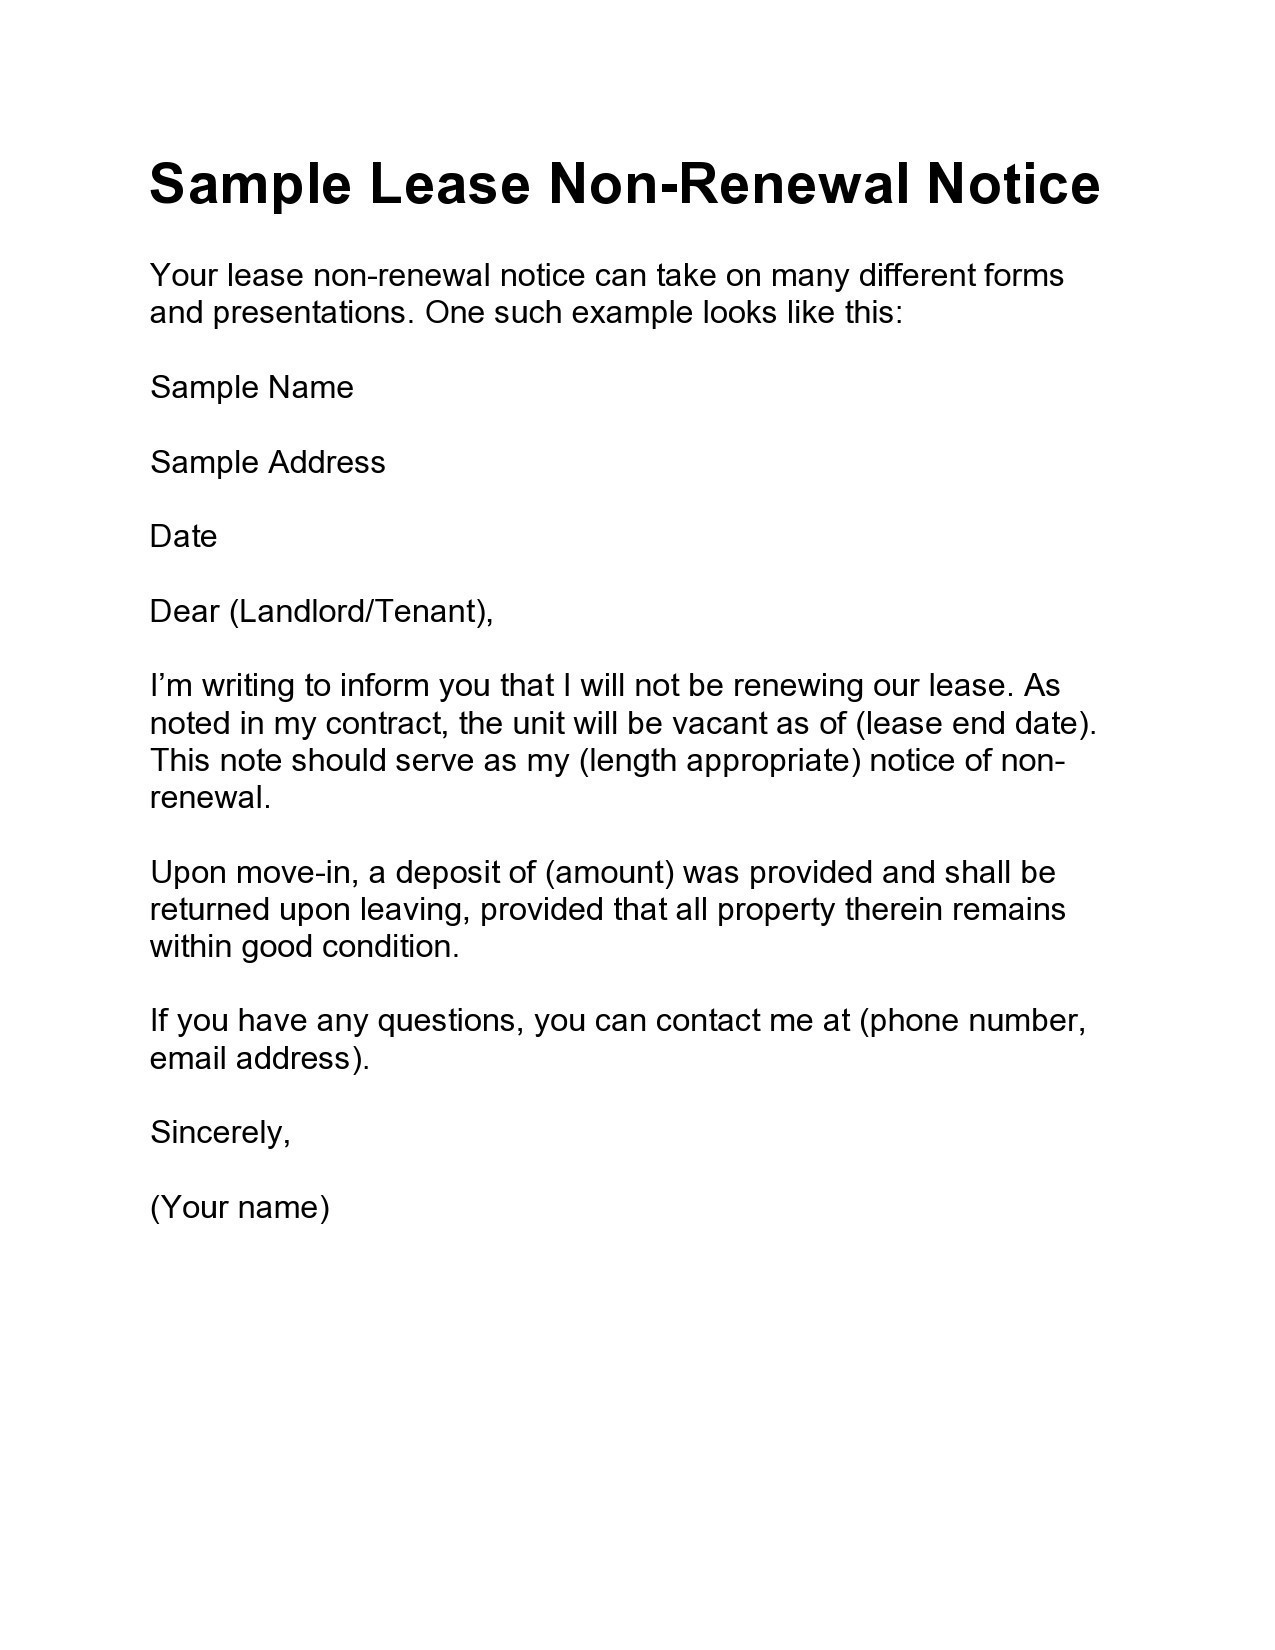 Free not renewing lease letter 29